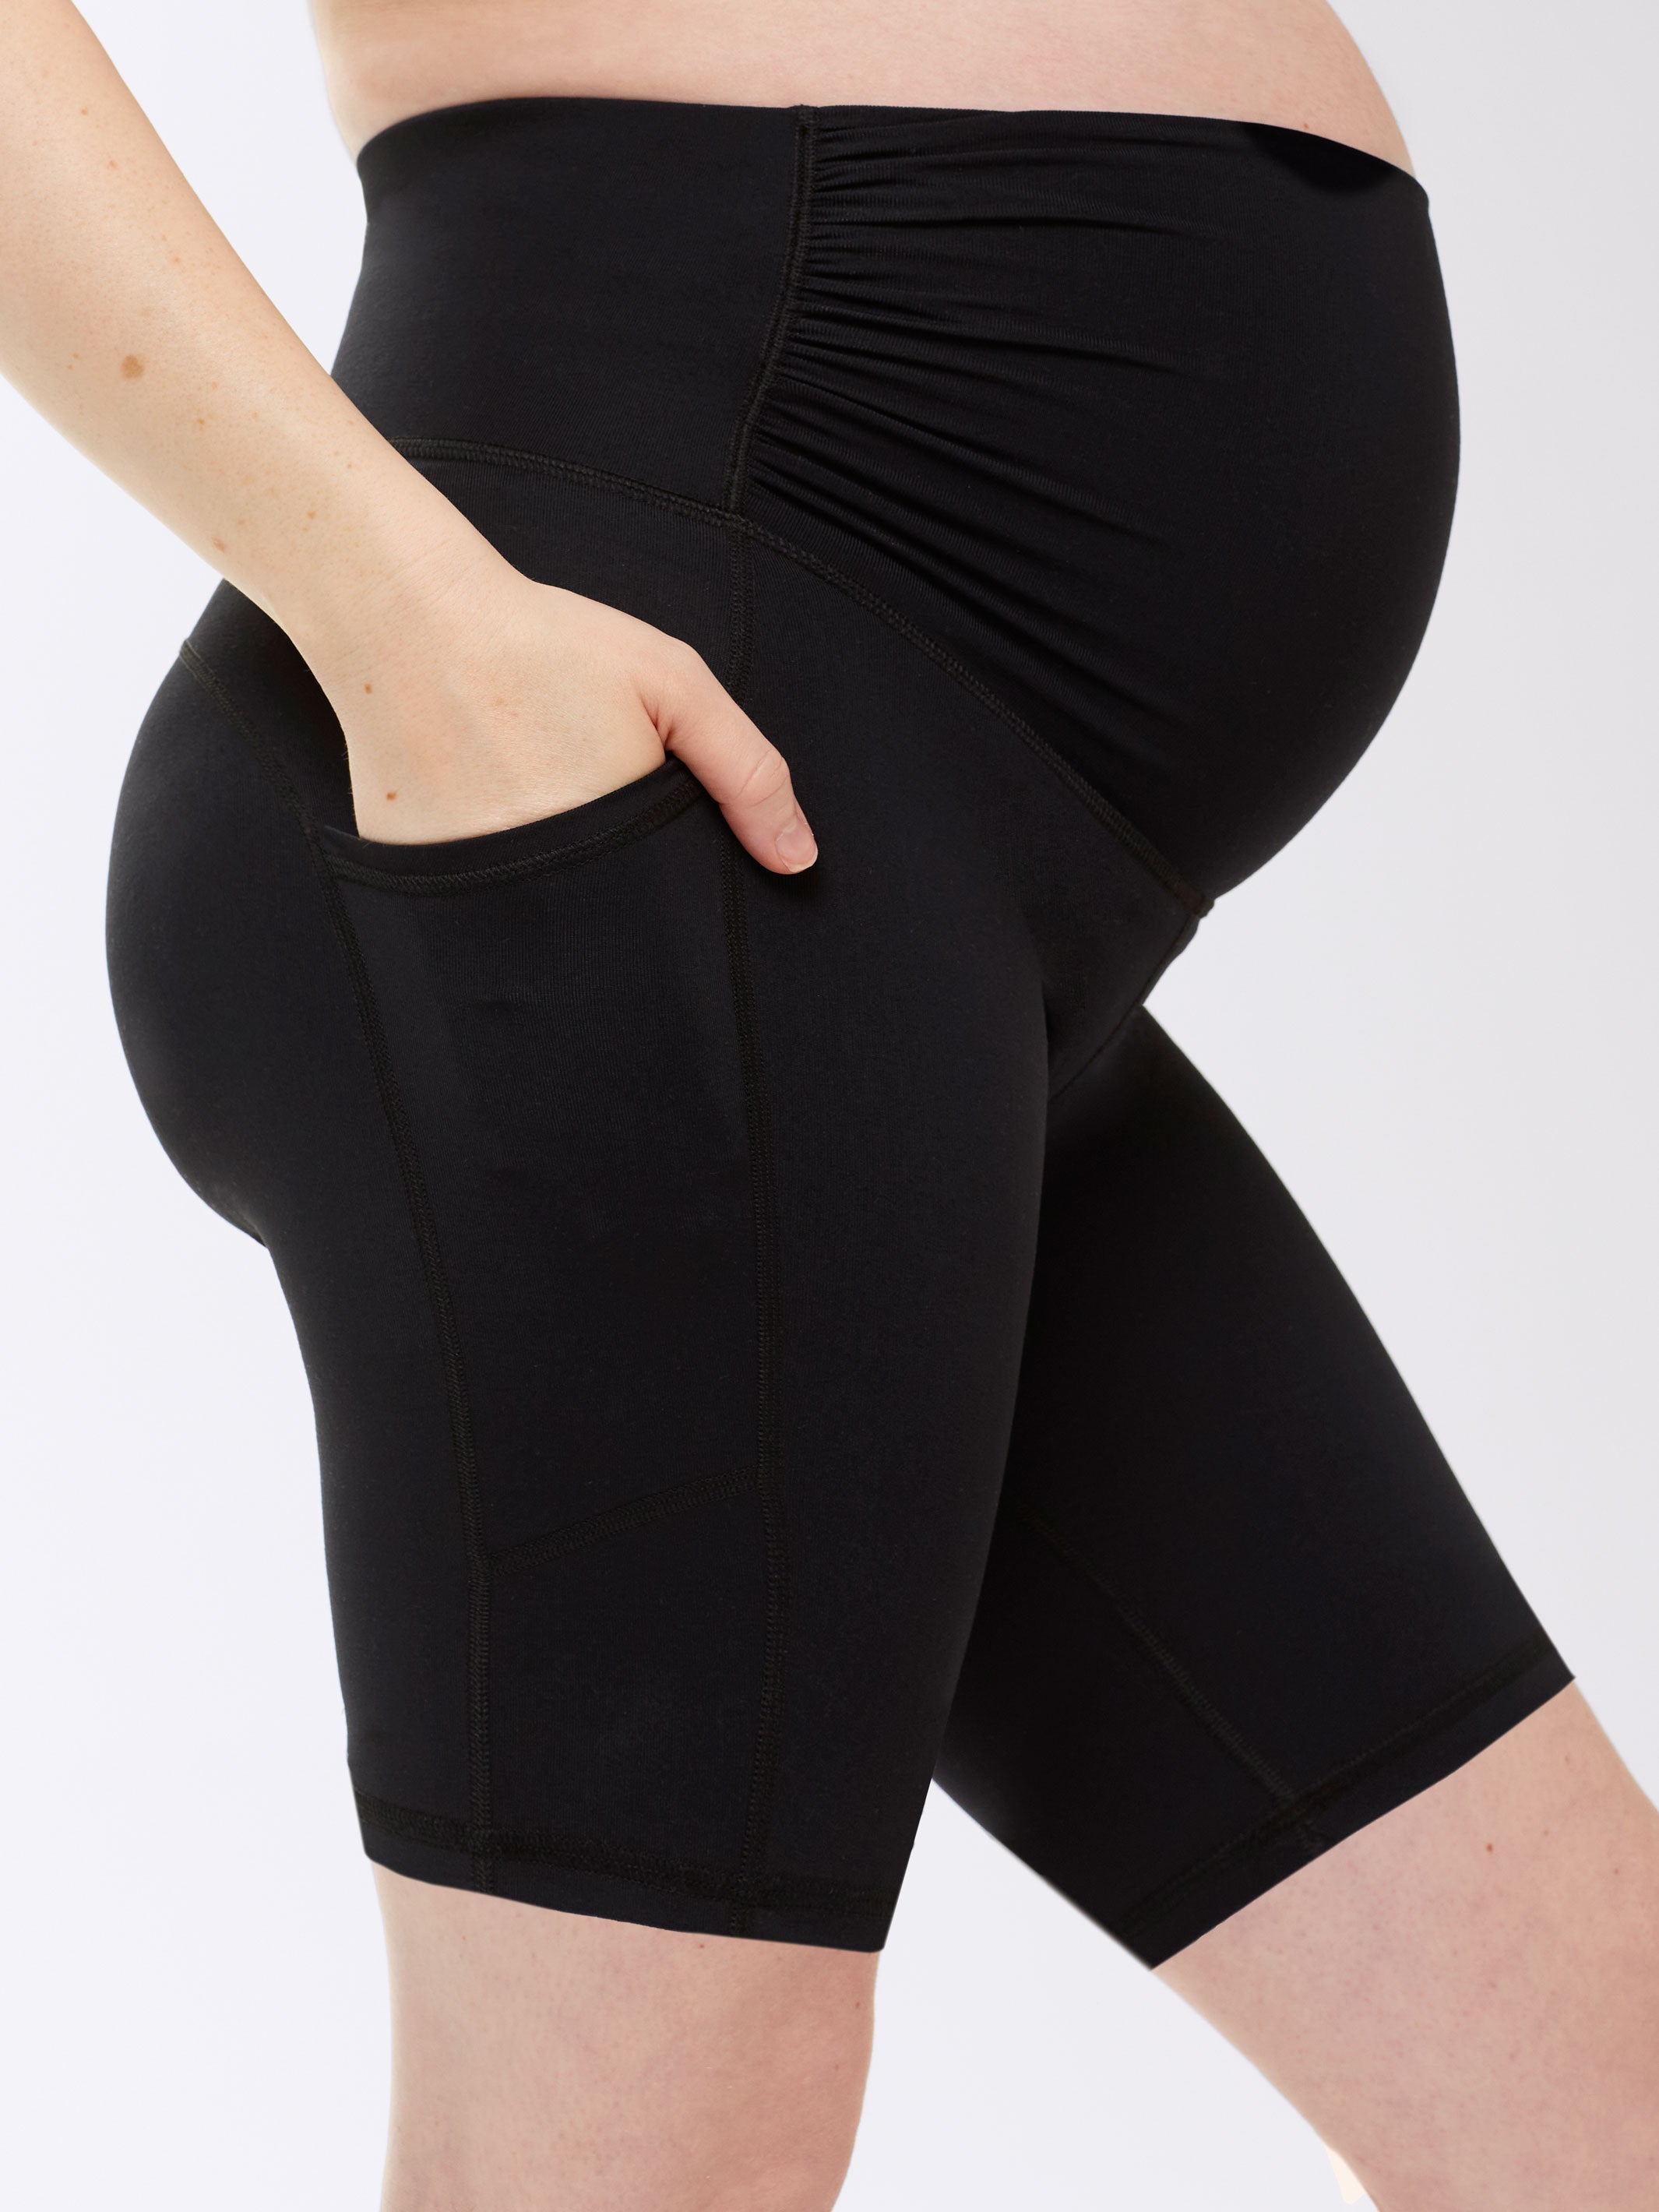 When do I need to buy maternity clothes?